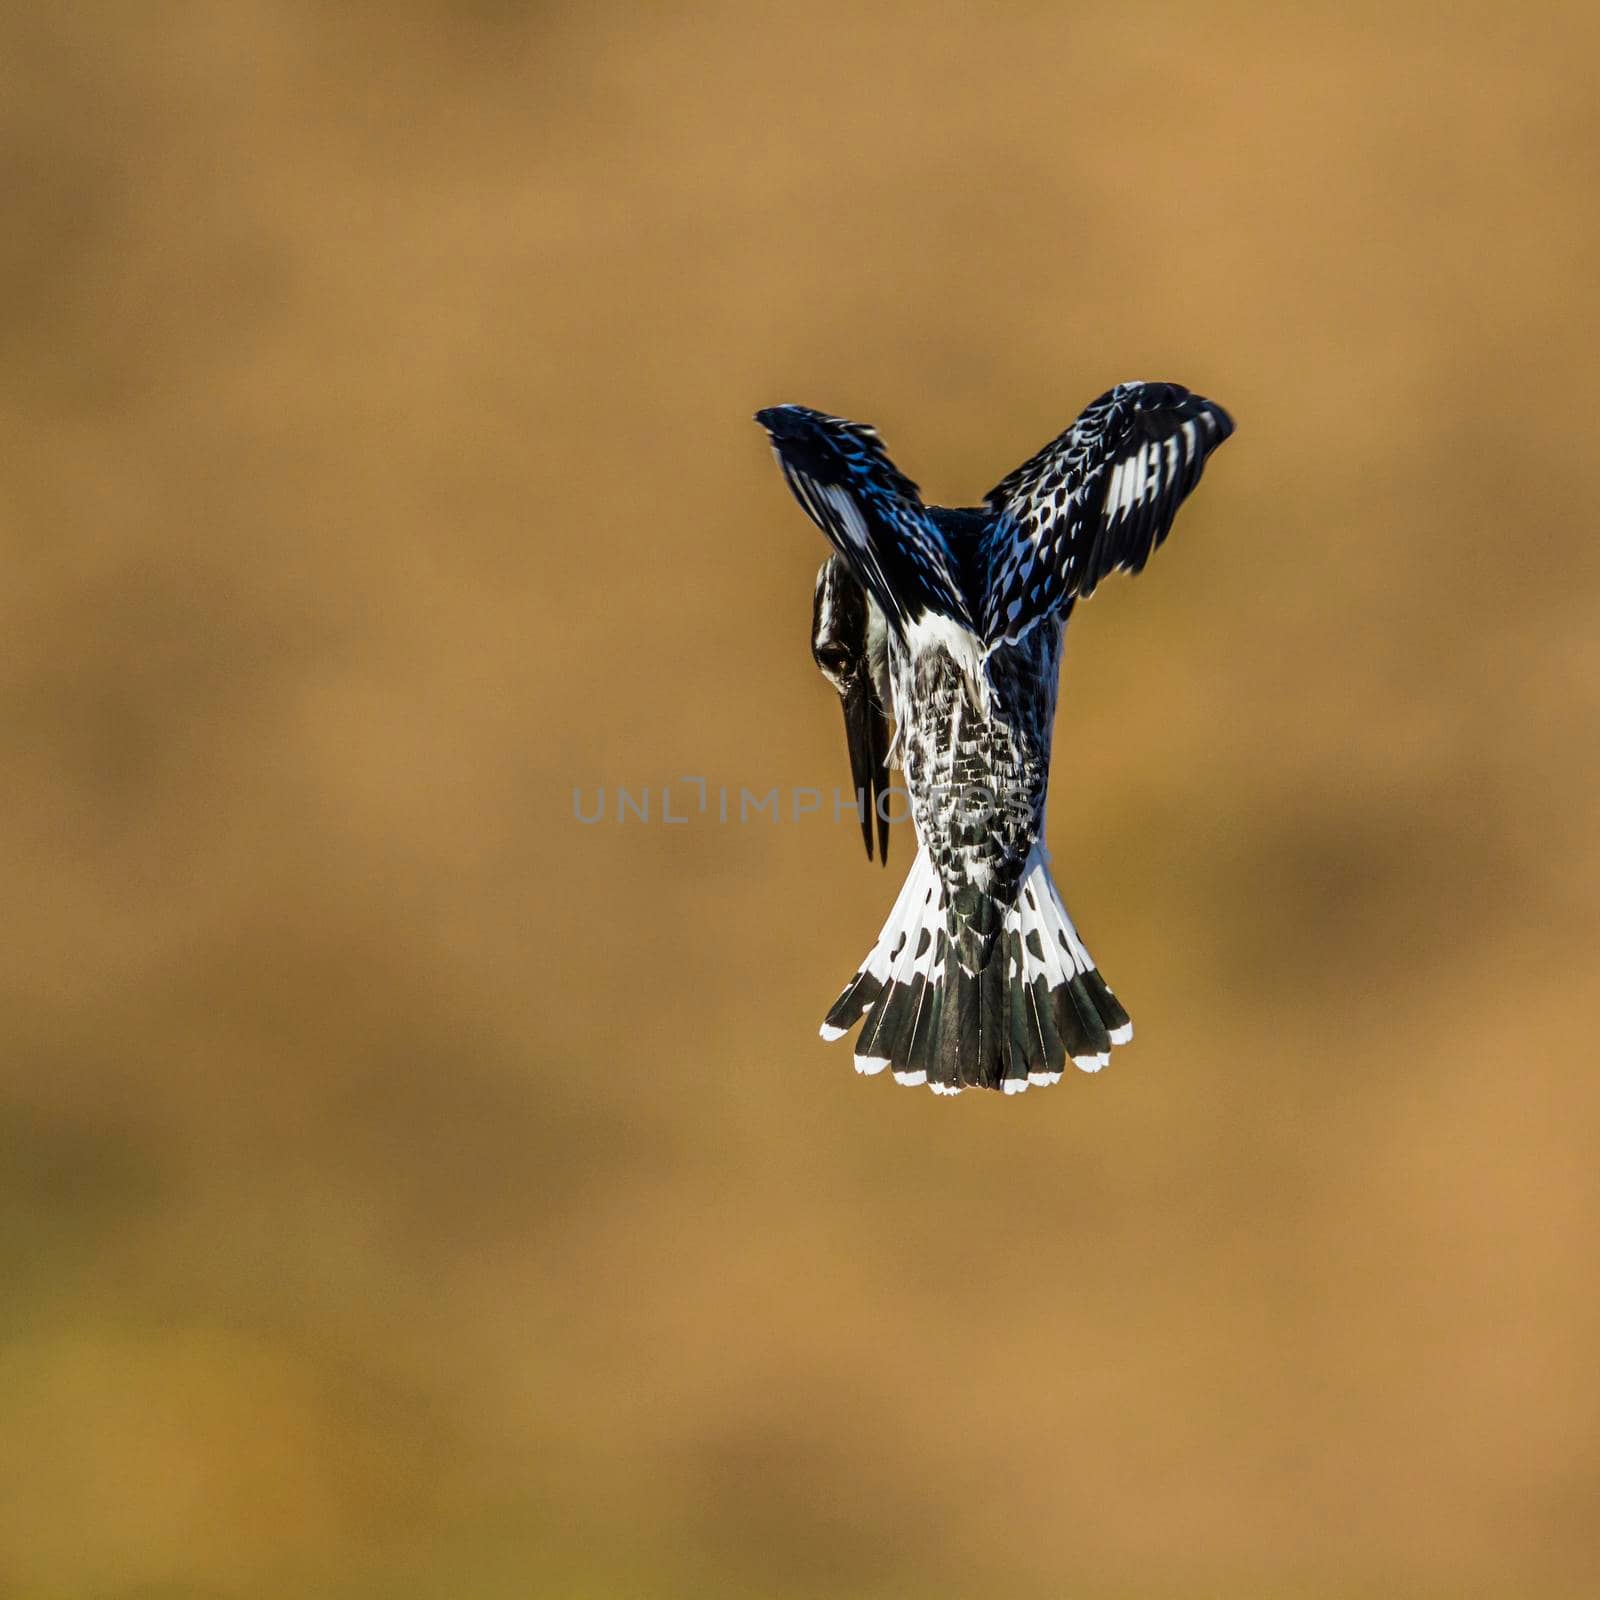 Pied kingfisher in Kruger National park, South Africa by PACOCOMO